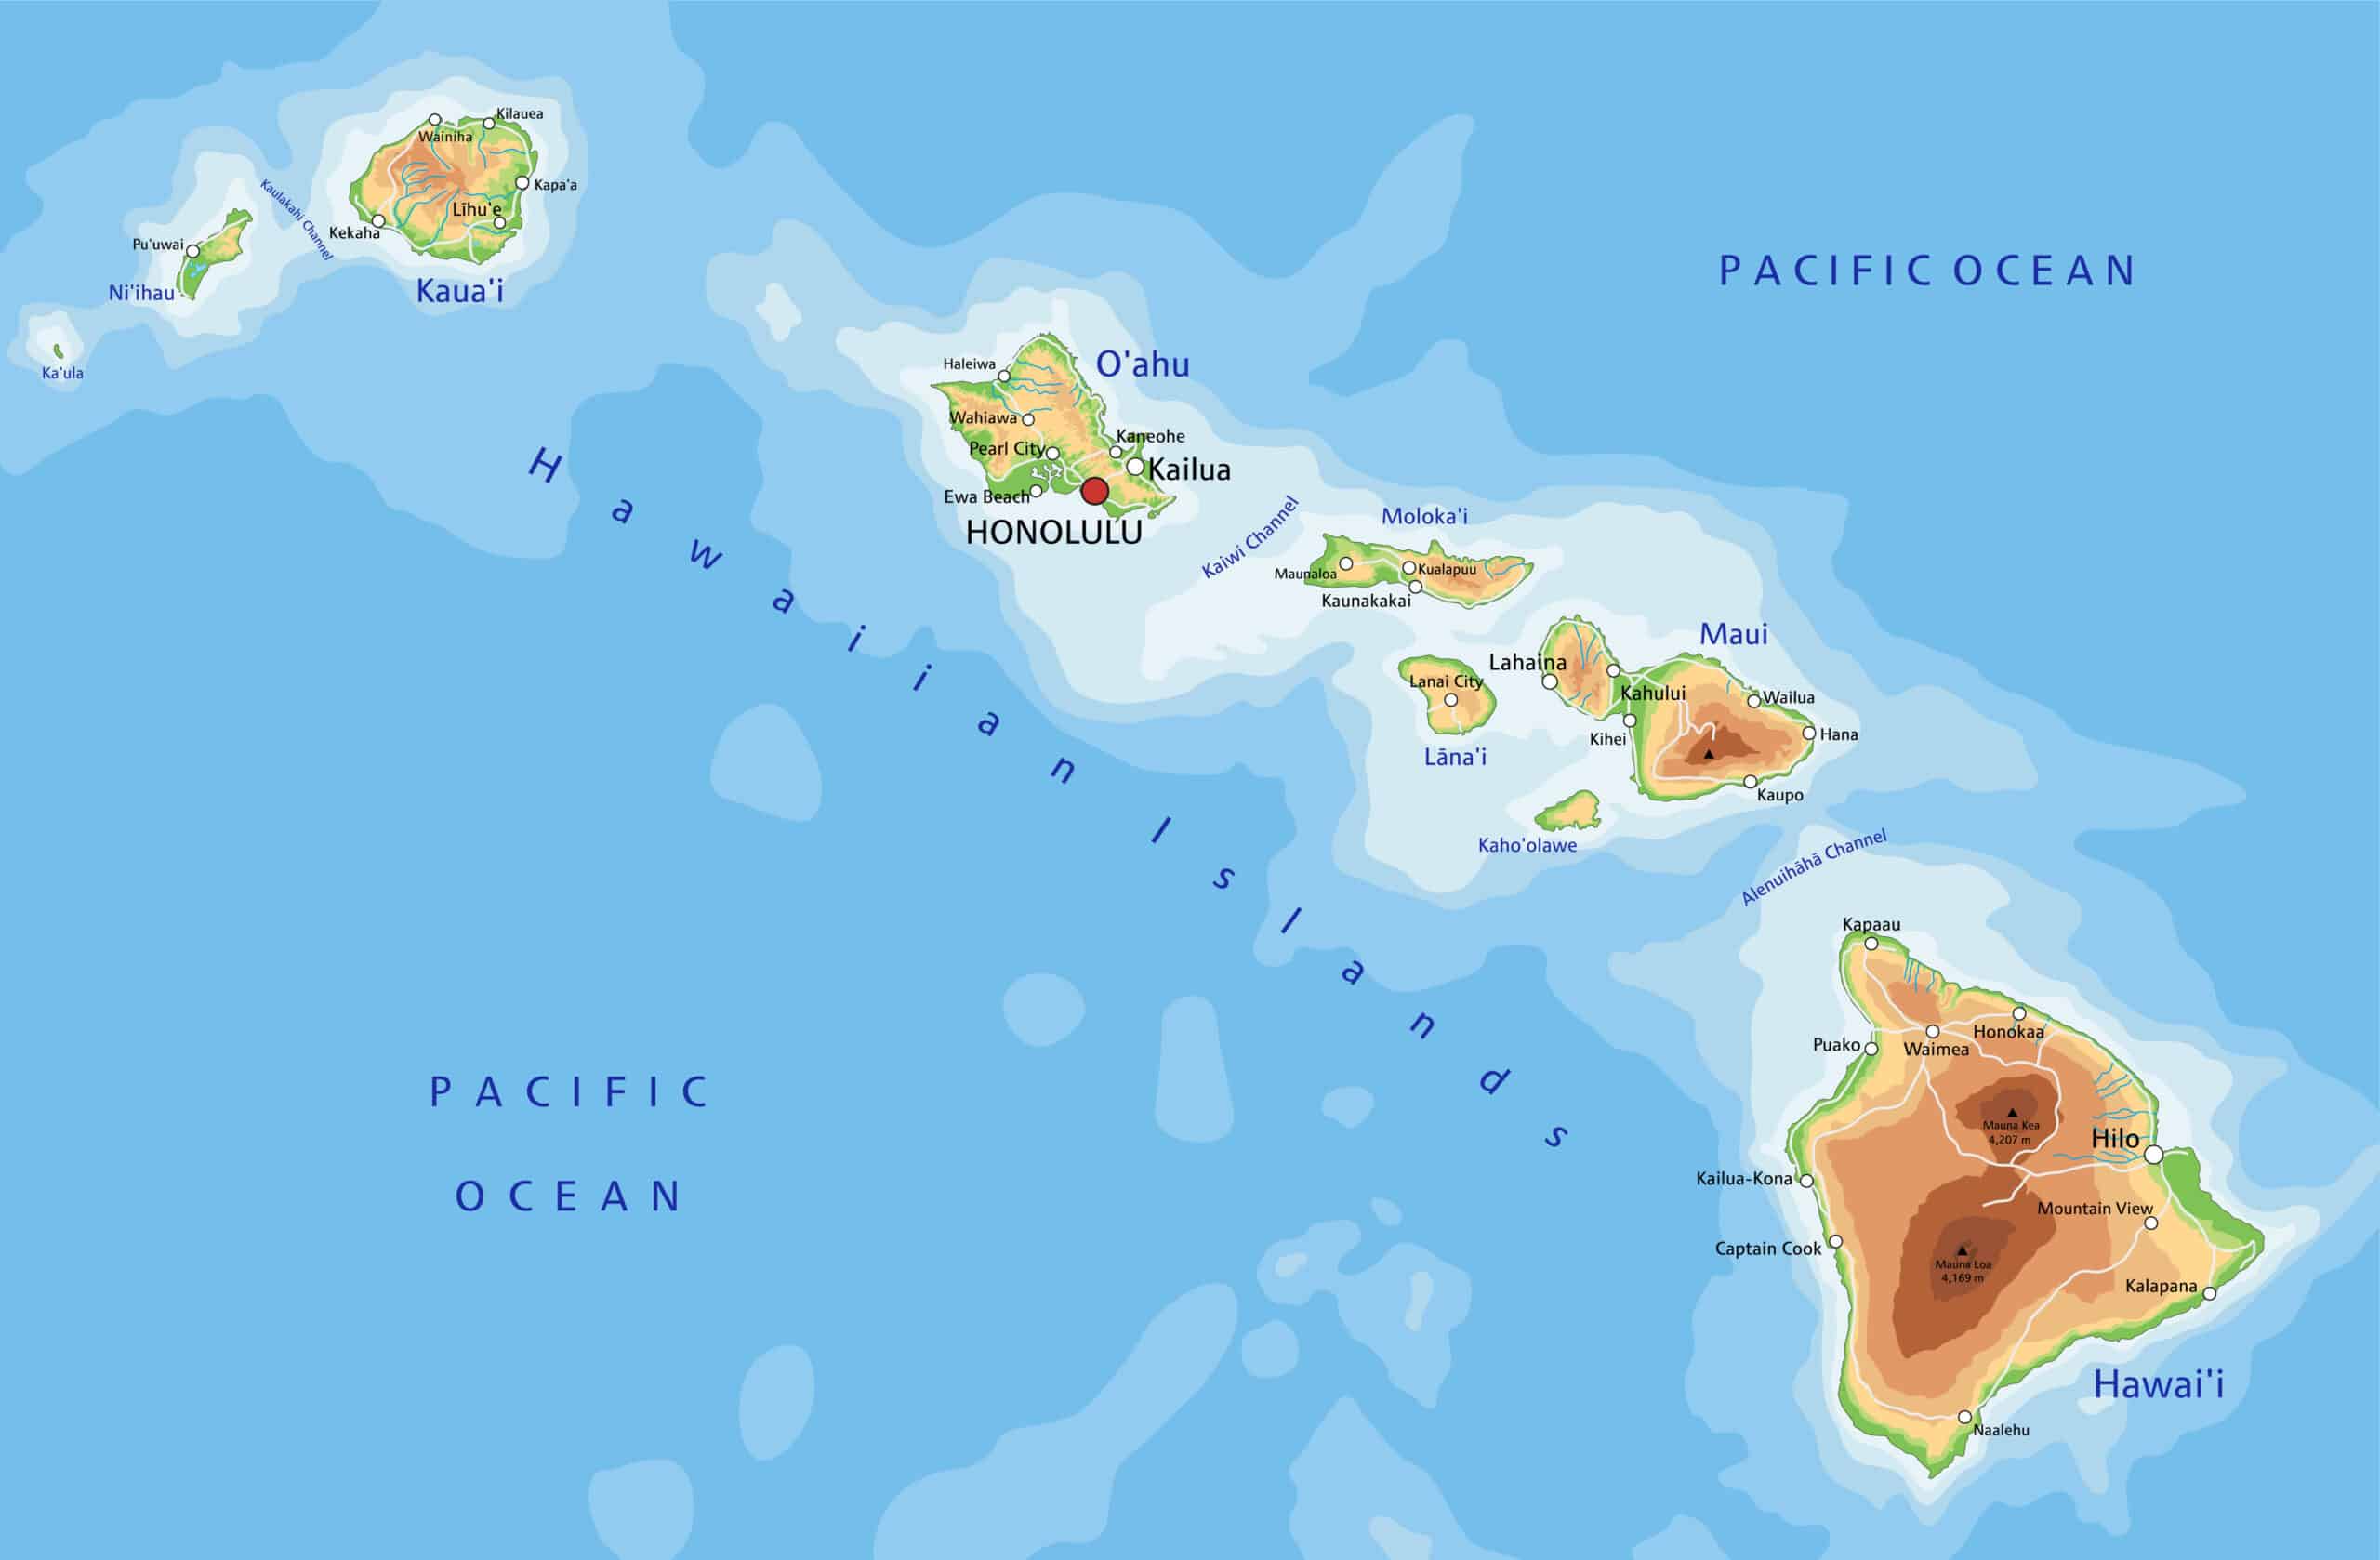 A map of the Hawaiian Islands, detailing the topography and locations of major cities and landmarks within the islands.